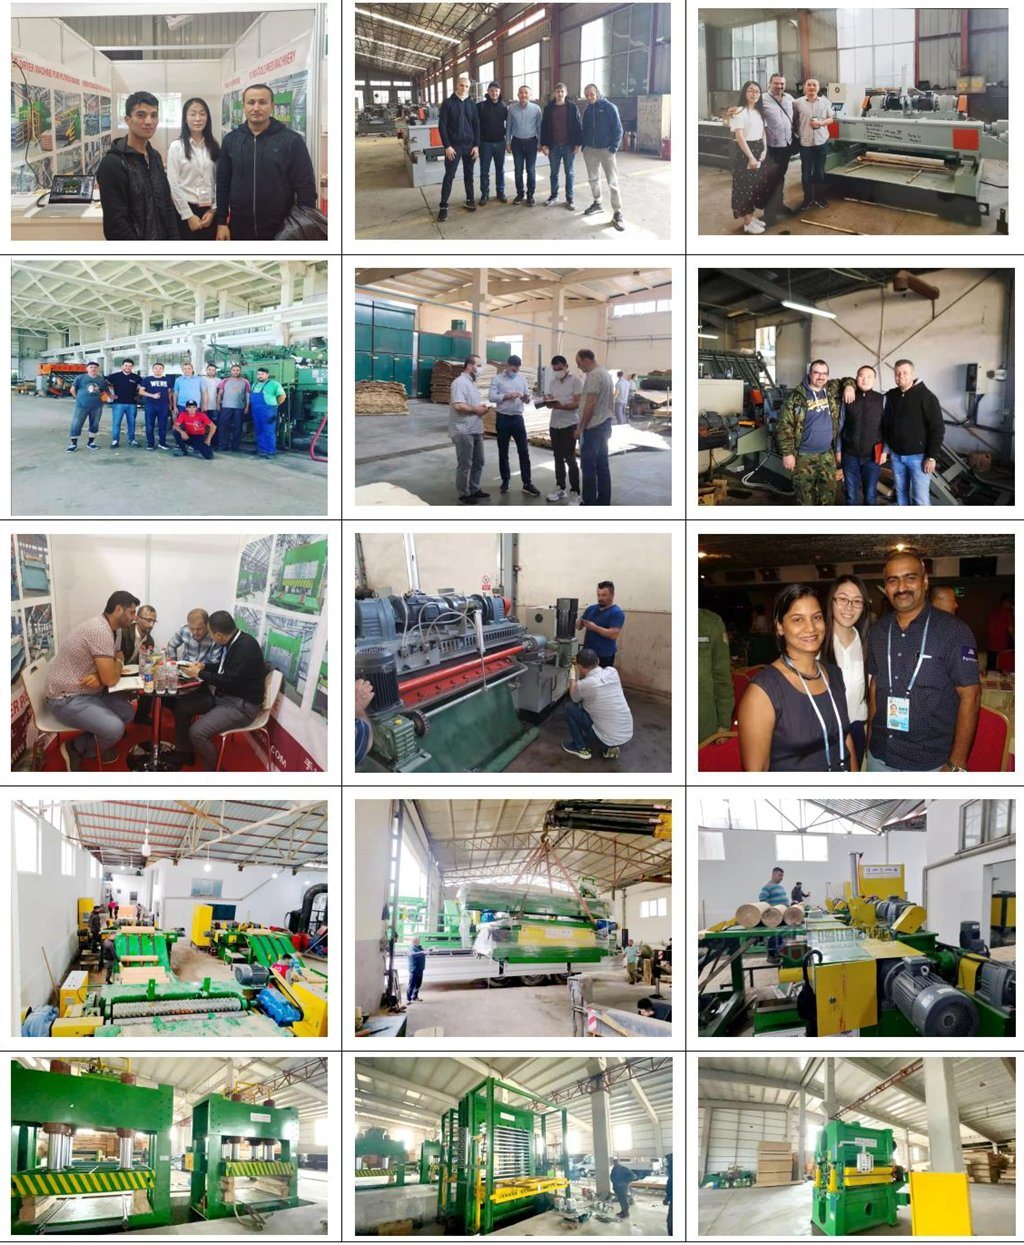 China Sanding Machine for Plywood 1250*2500mm Production